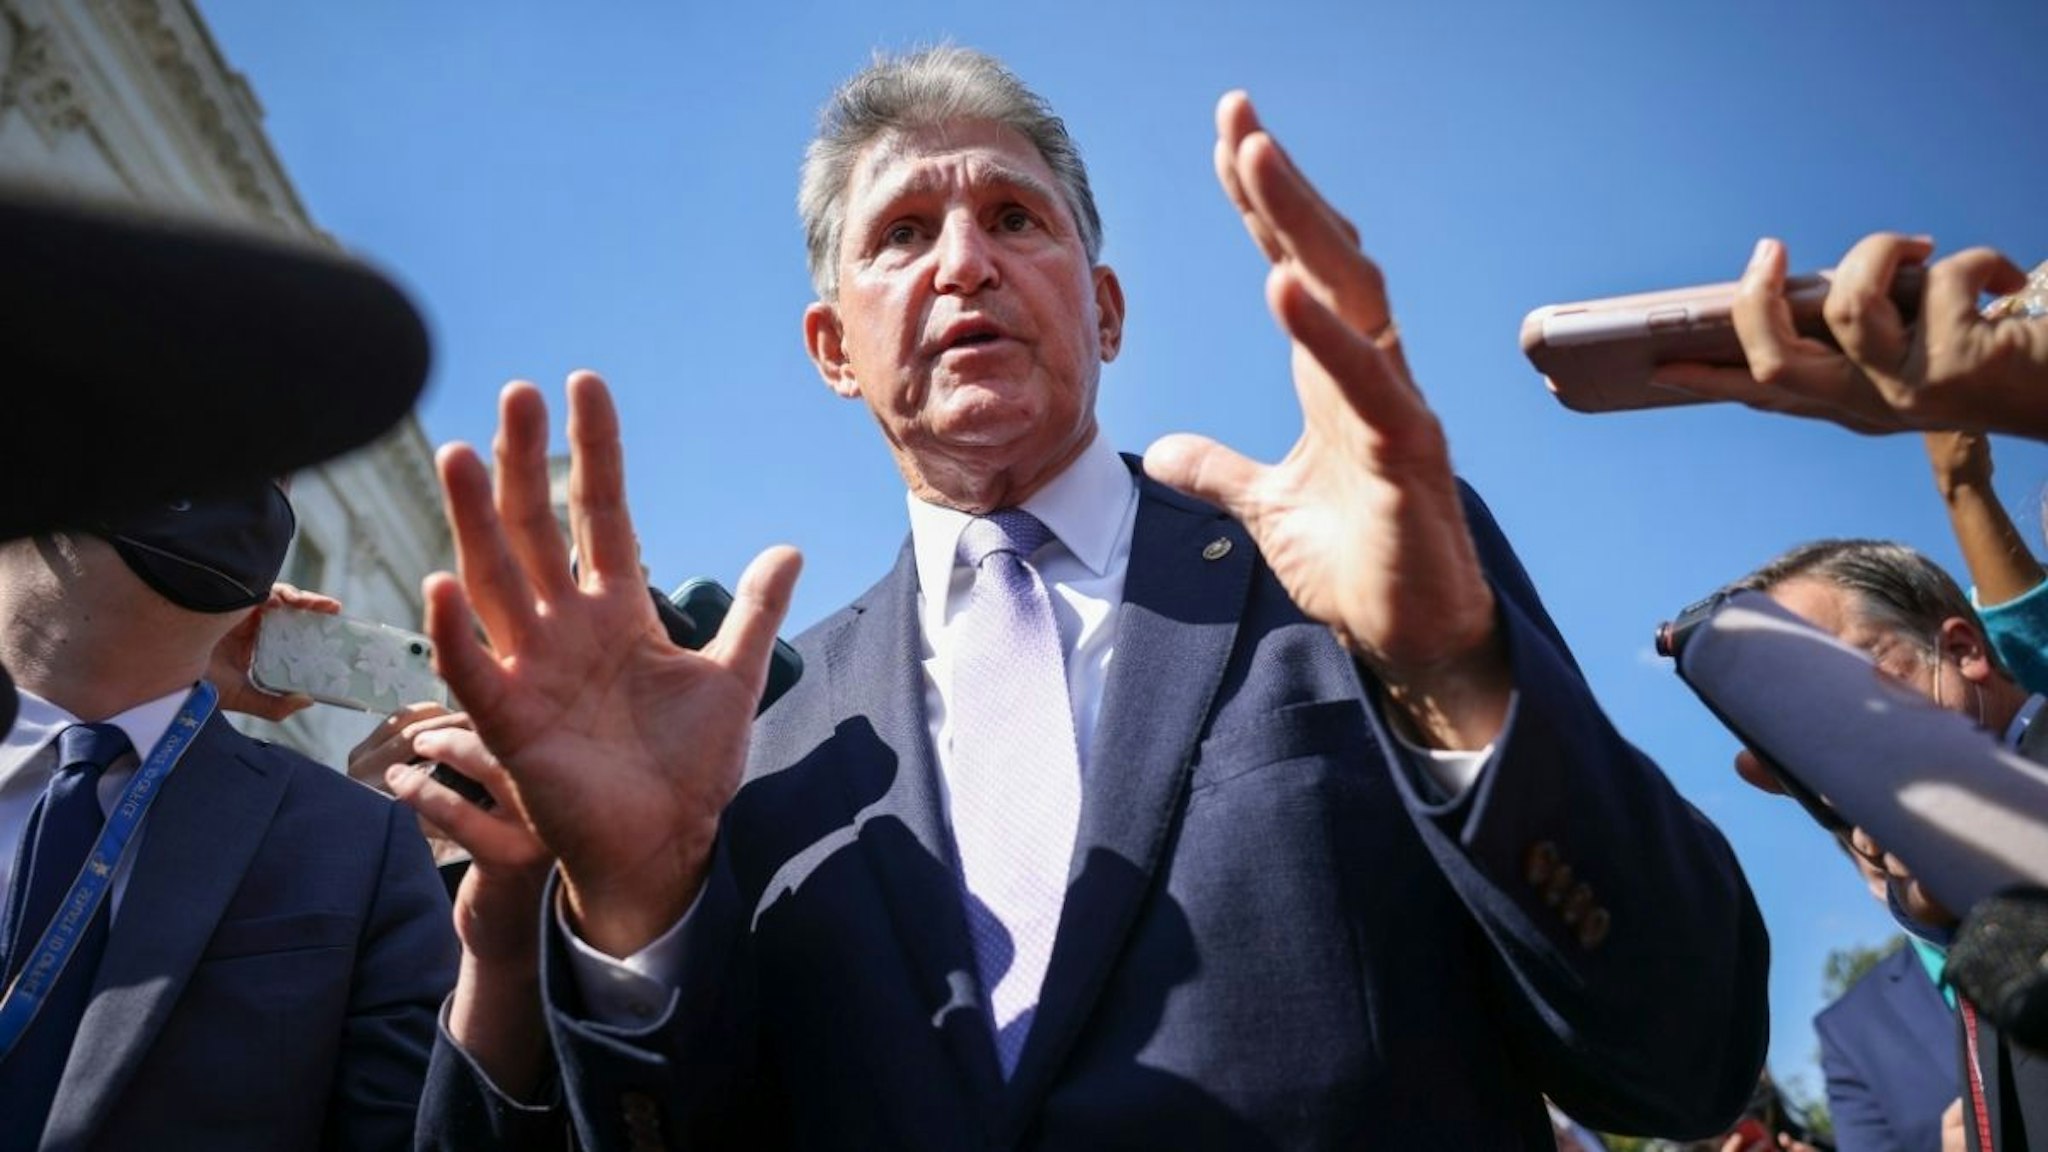 Joe Manchin (D-WV) speaks to reporters outside of the U.S. Capitol on September 30, 2021 in Washington, DC.